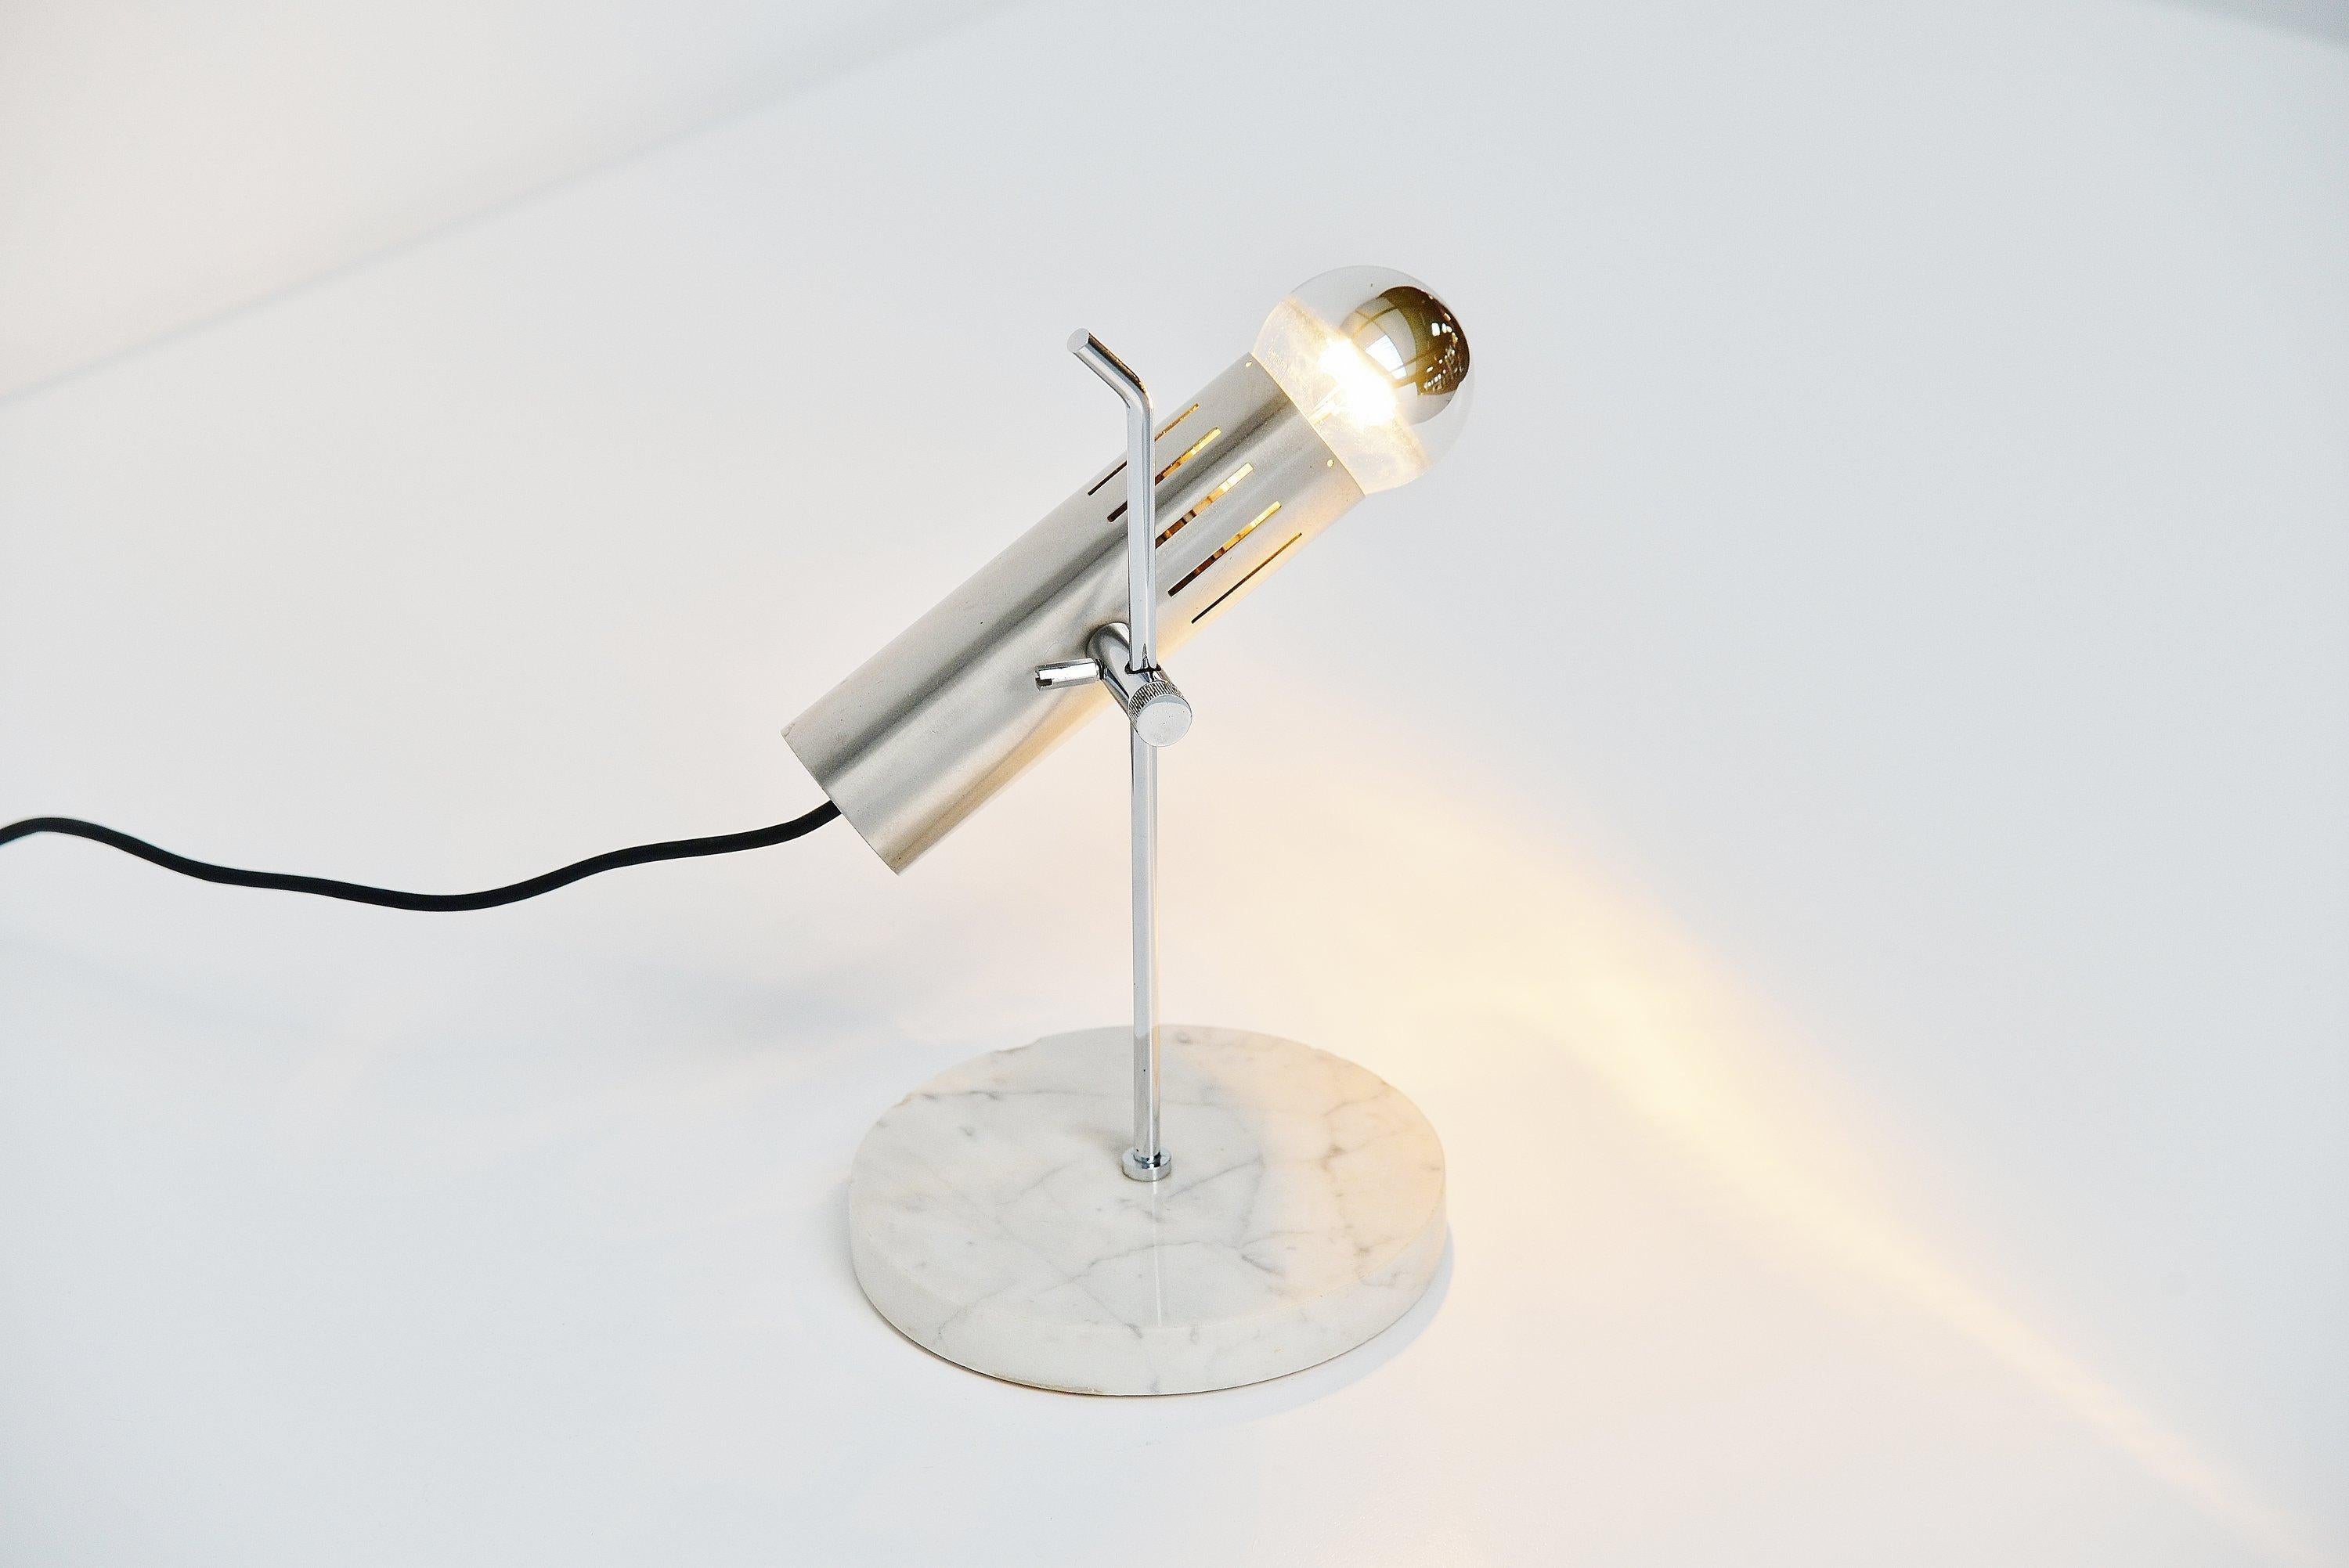 Minimalist table lamp model A4 designed by Alain Richard and manufactured by Disderot, France 1958. This lamp has a solid white Carrara marble base and a chrome peg that holds the tubular aluminium shade. Looks great with a half mirrored bulb and